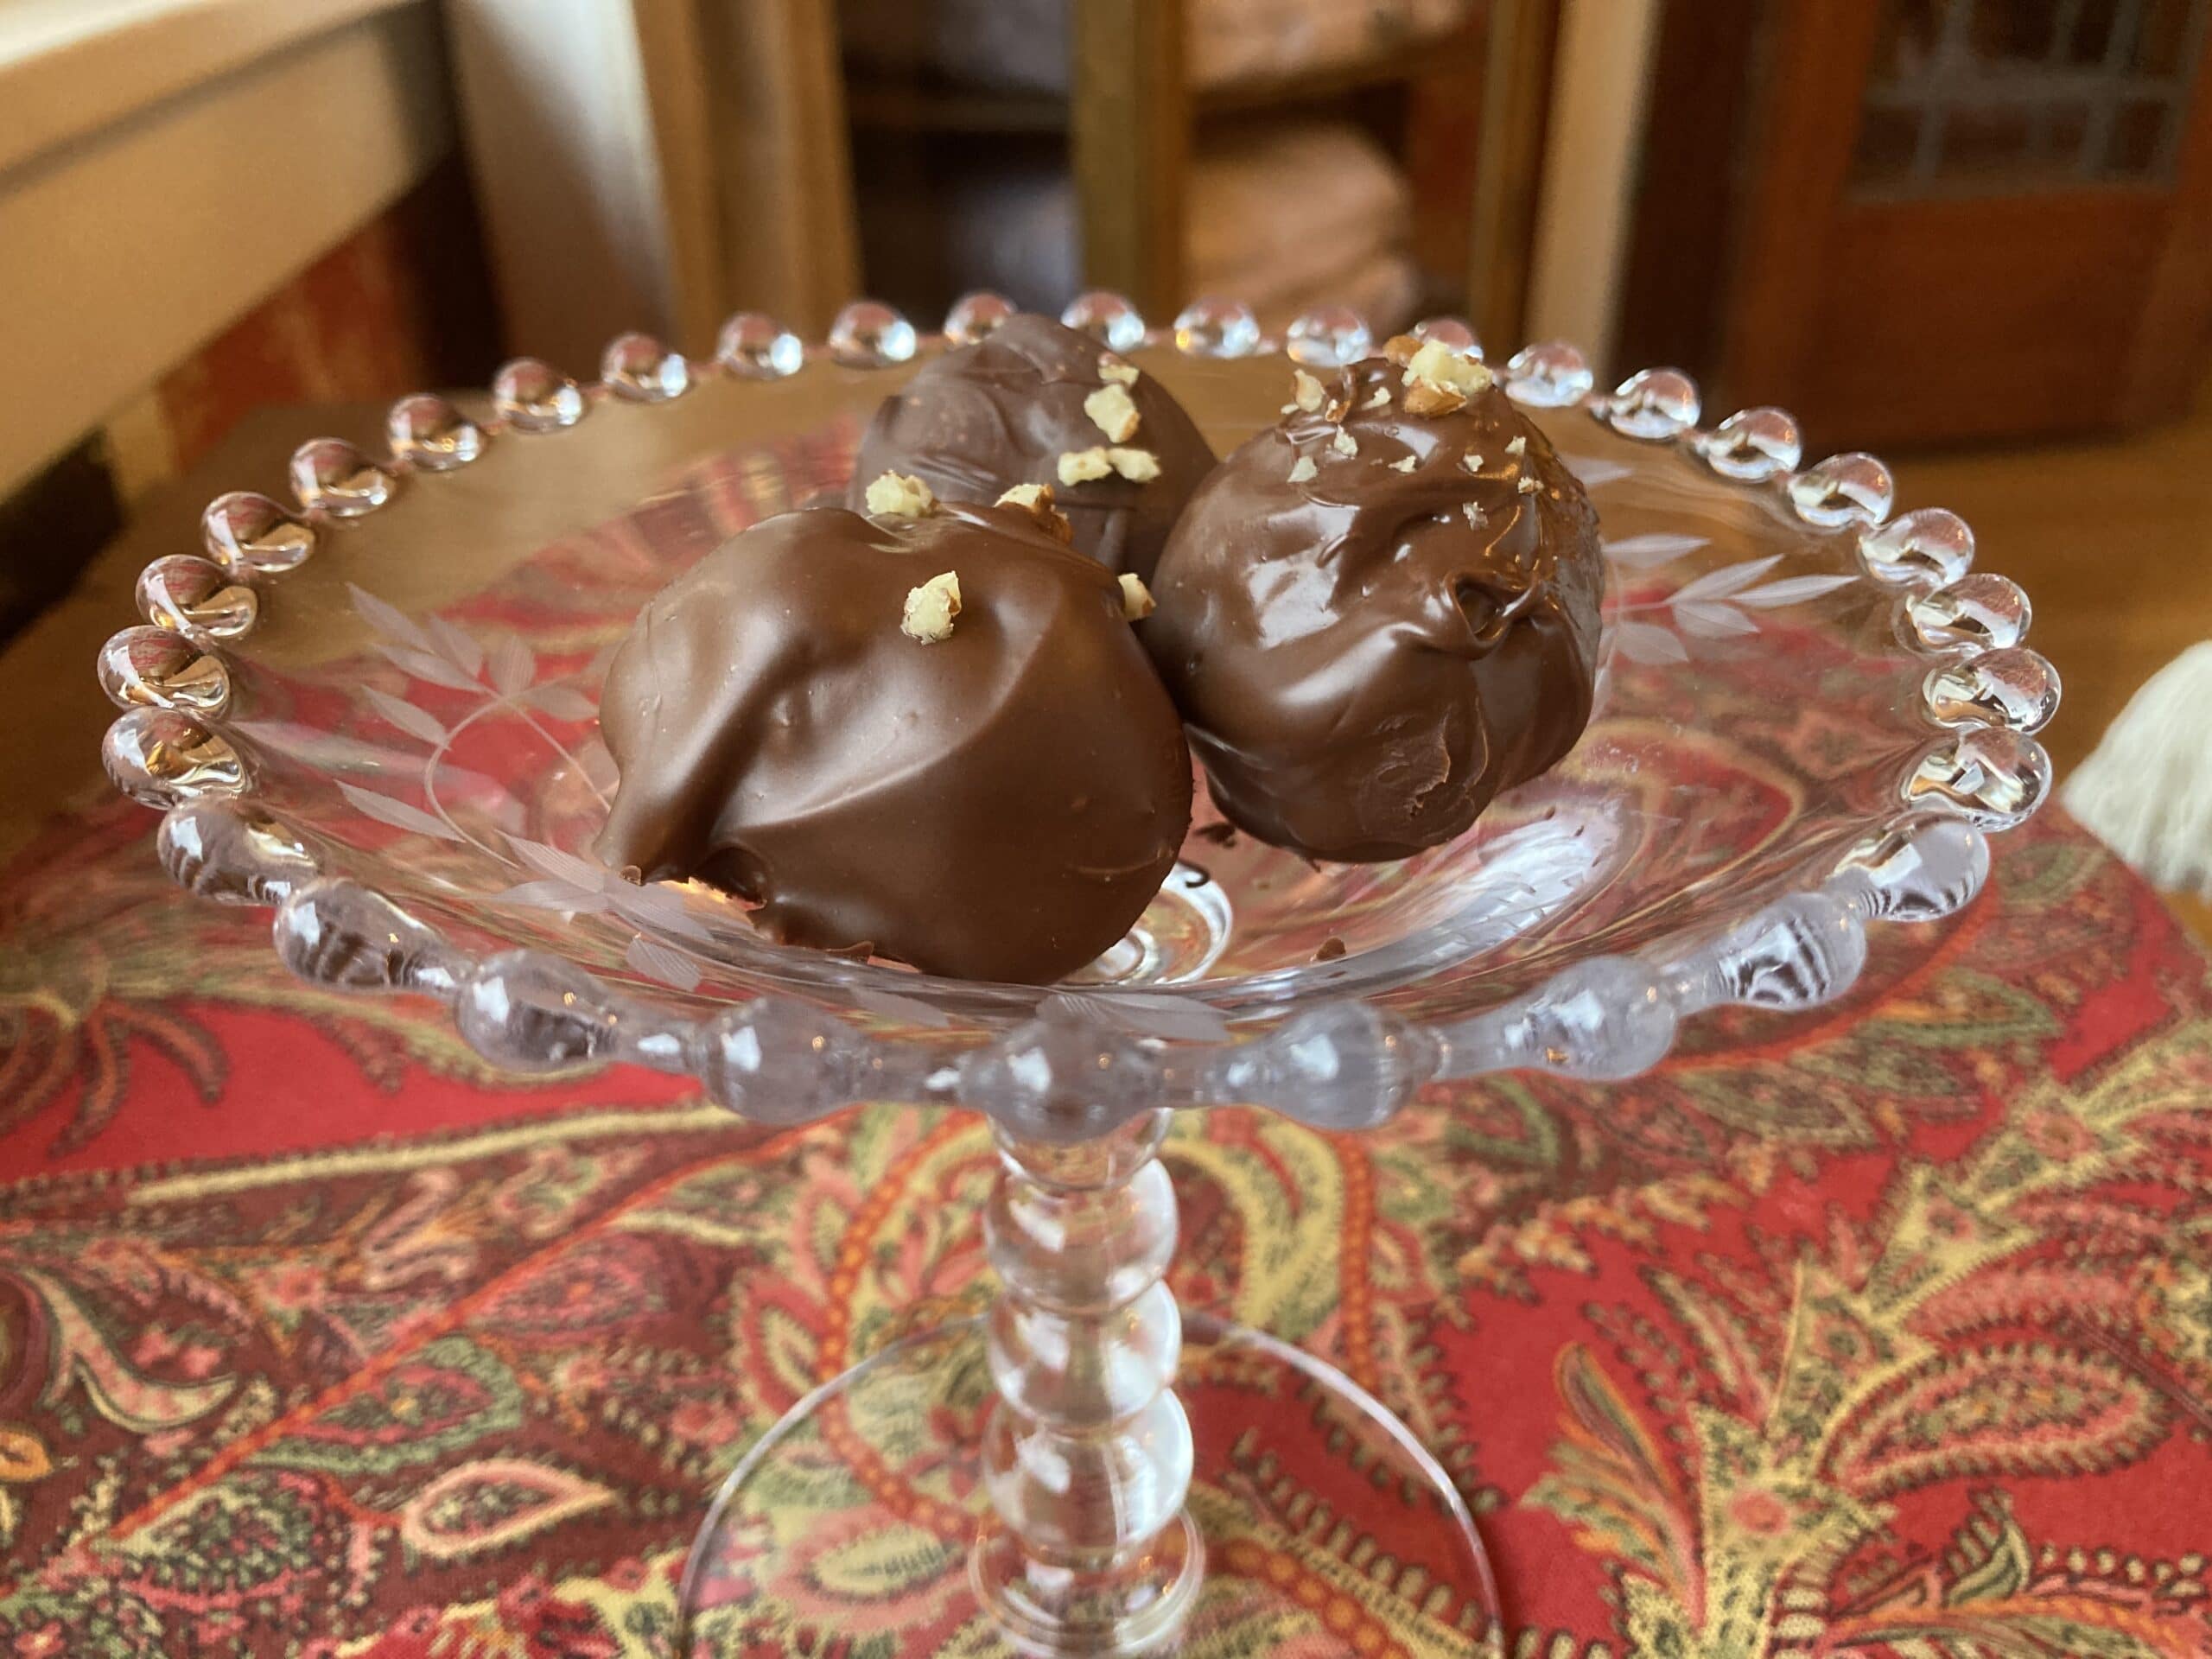 chocolate candies in a dish